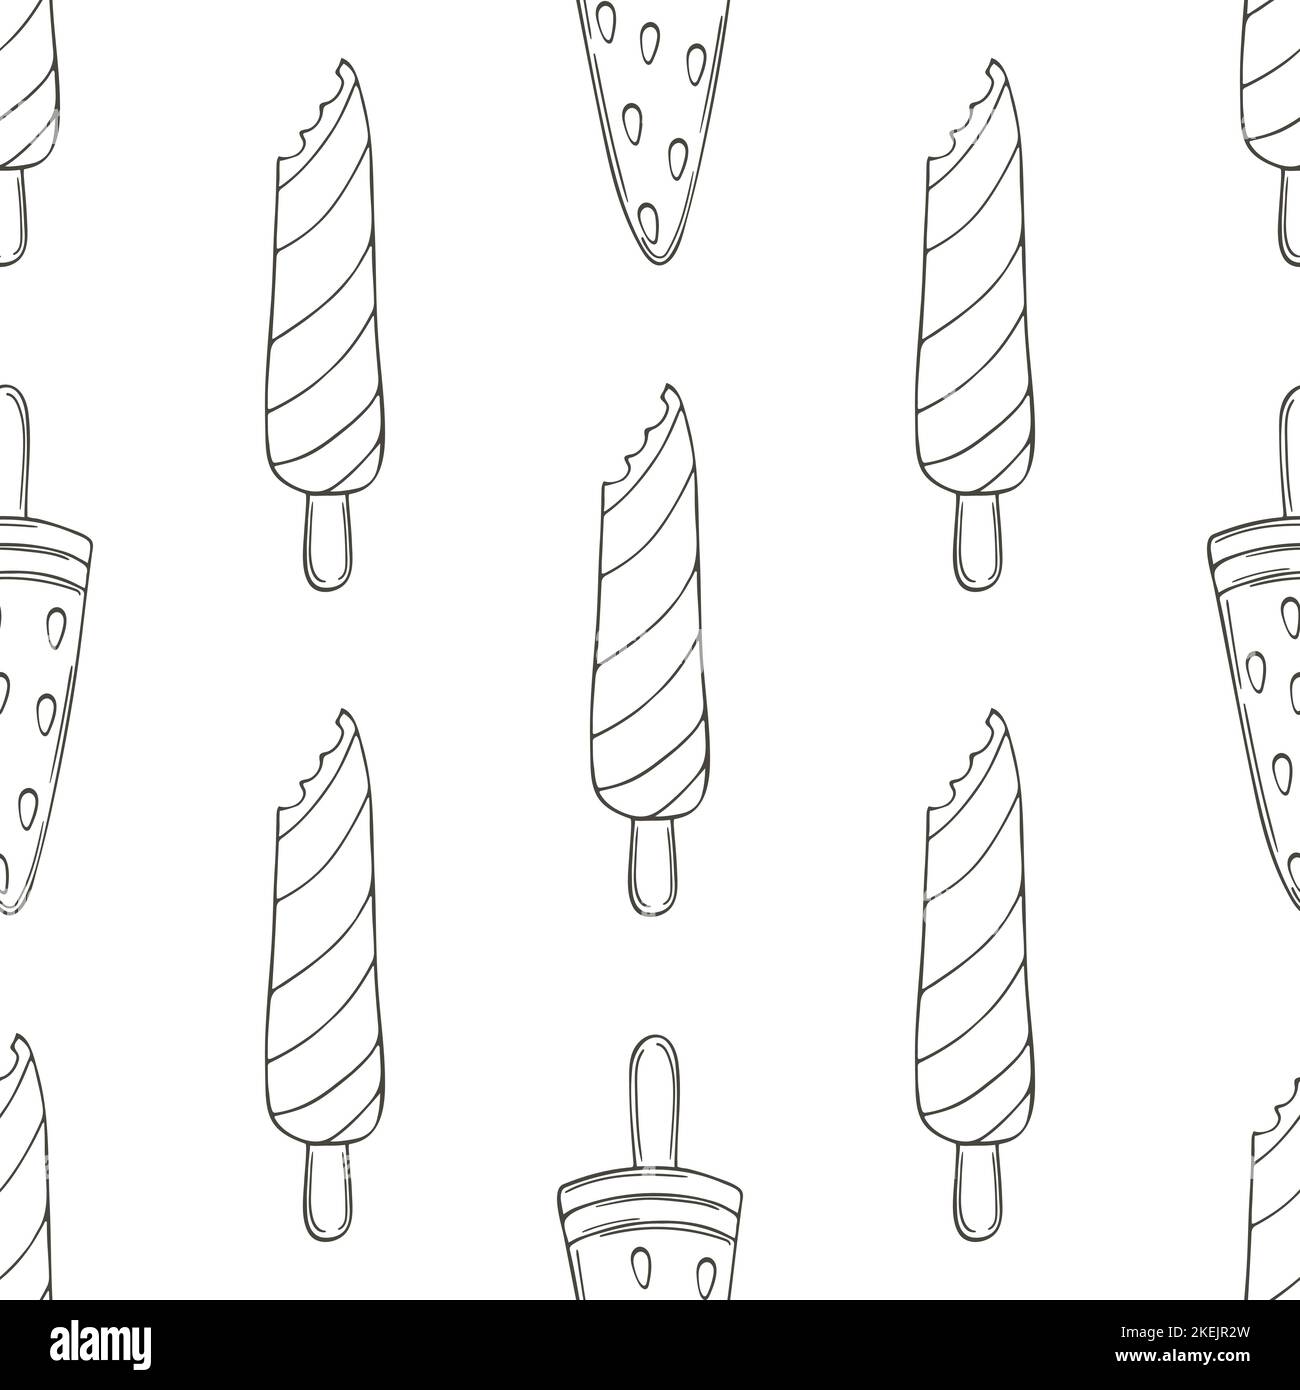 Summer. Coloring ice cream seamless pattern. Wonderful bright pattern with watermelon dessert Stock Vector